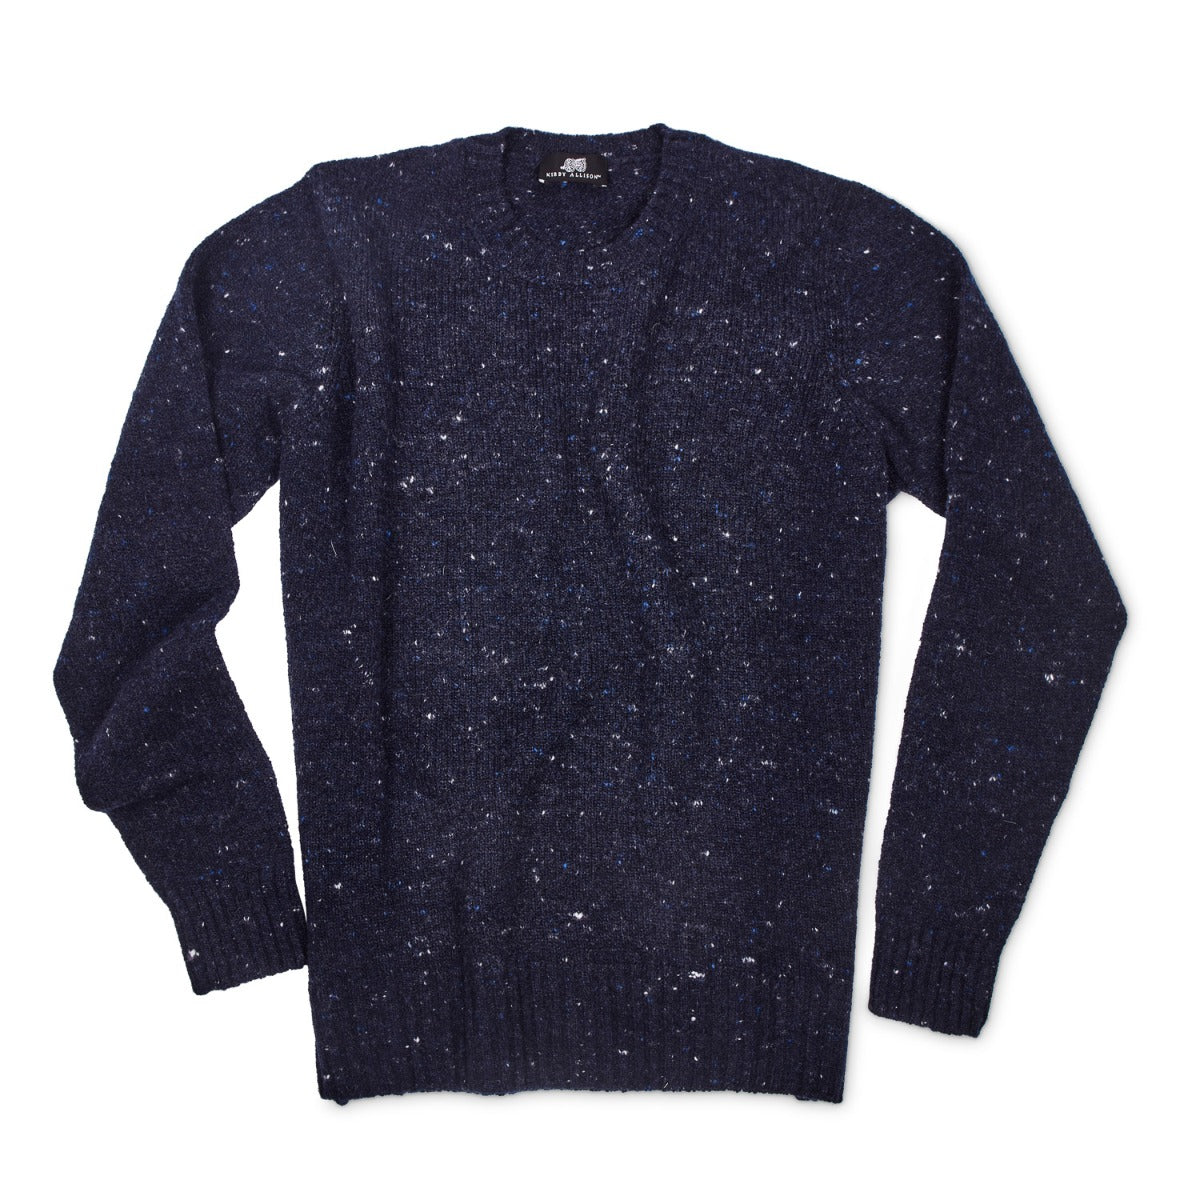 A Sovereign Grade Blue Donegal Crew Neck sweater from KirbyAllison.com with a speckled pattern.